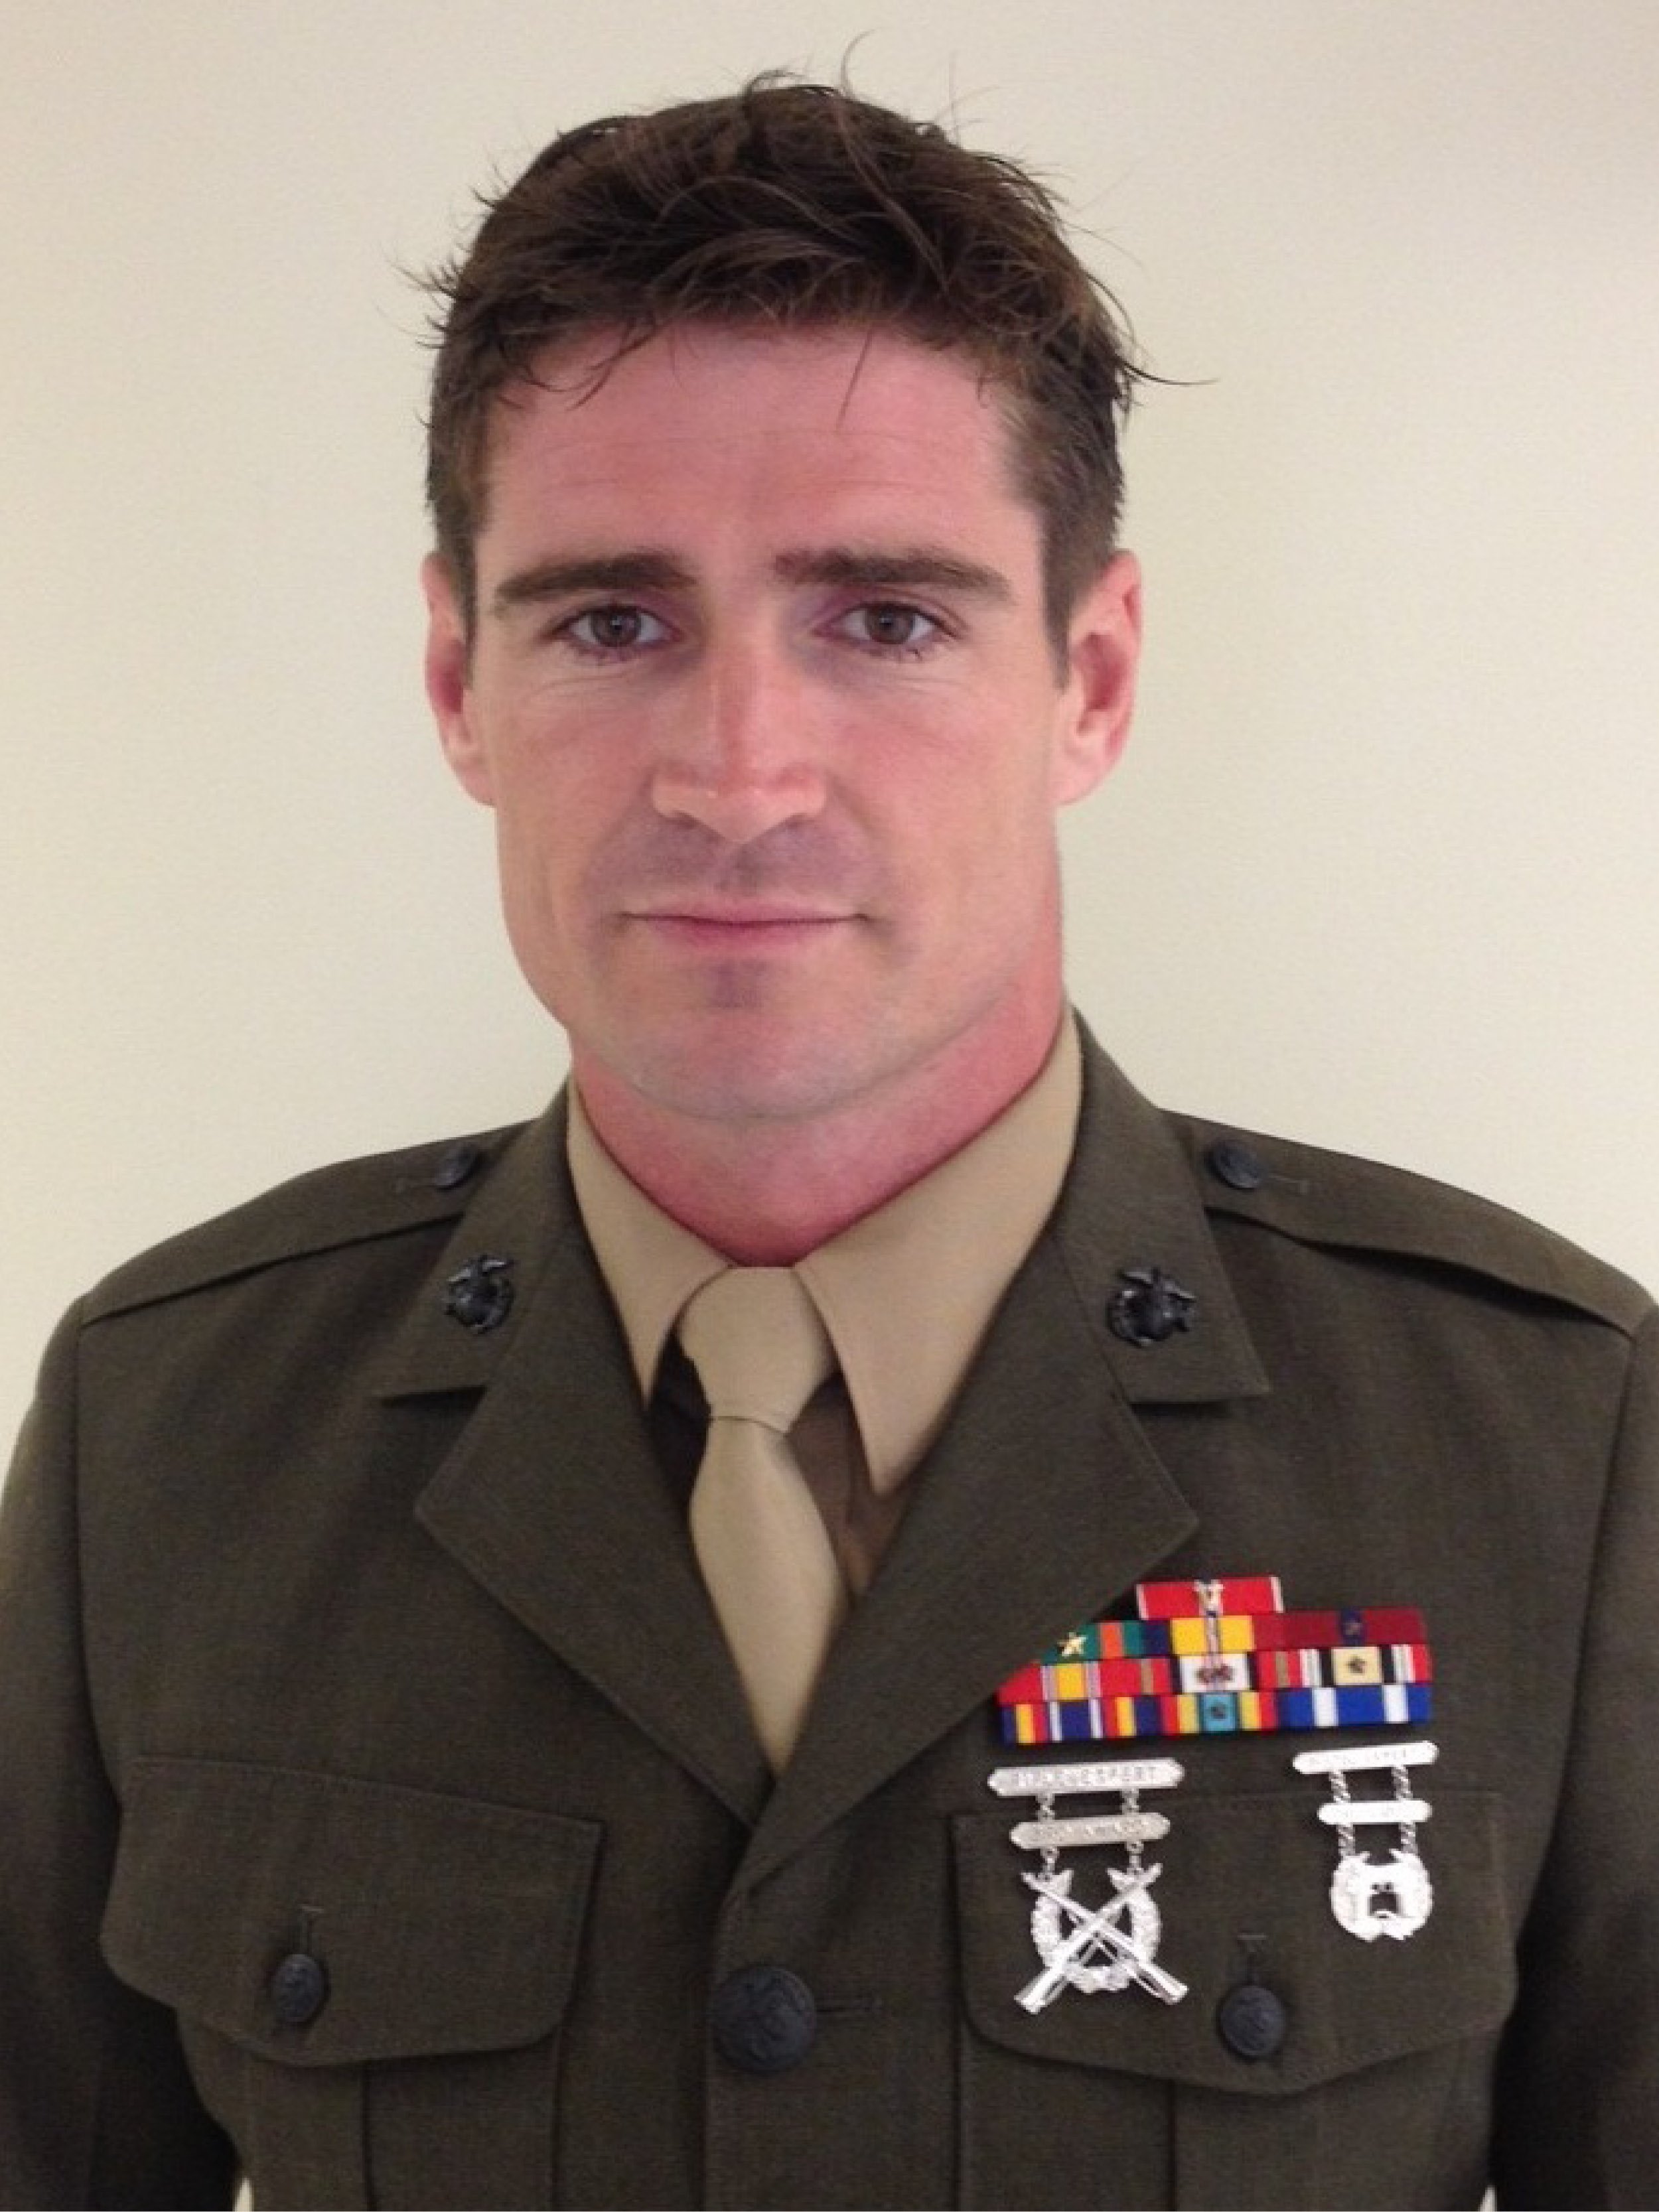 Staff Sgt. Liam A. Flynn died when a U.S. Army UH-60 Blackhawk Helicopter crashed near Eglin, Florida, at approximately 8:30 p.m. March 10, 2015. Flynn, 33, a native of Queens, New York, served within U.S. Marine Corps Forces, Special Operational Command as an assistant element member. His personal awards include (3) Navy and Marine Corps Achievement Medals with Valor, the Bronze Star with Valor and Combat Action Ribbon.